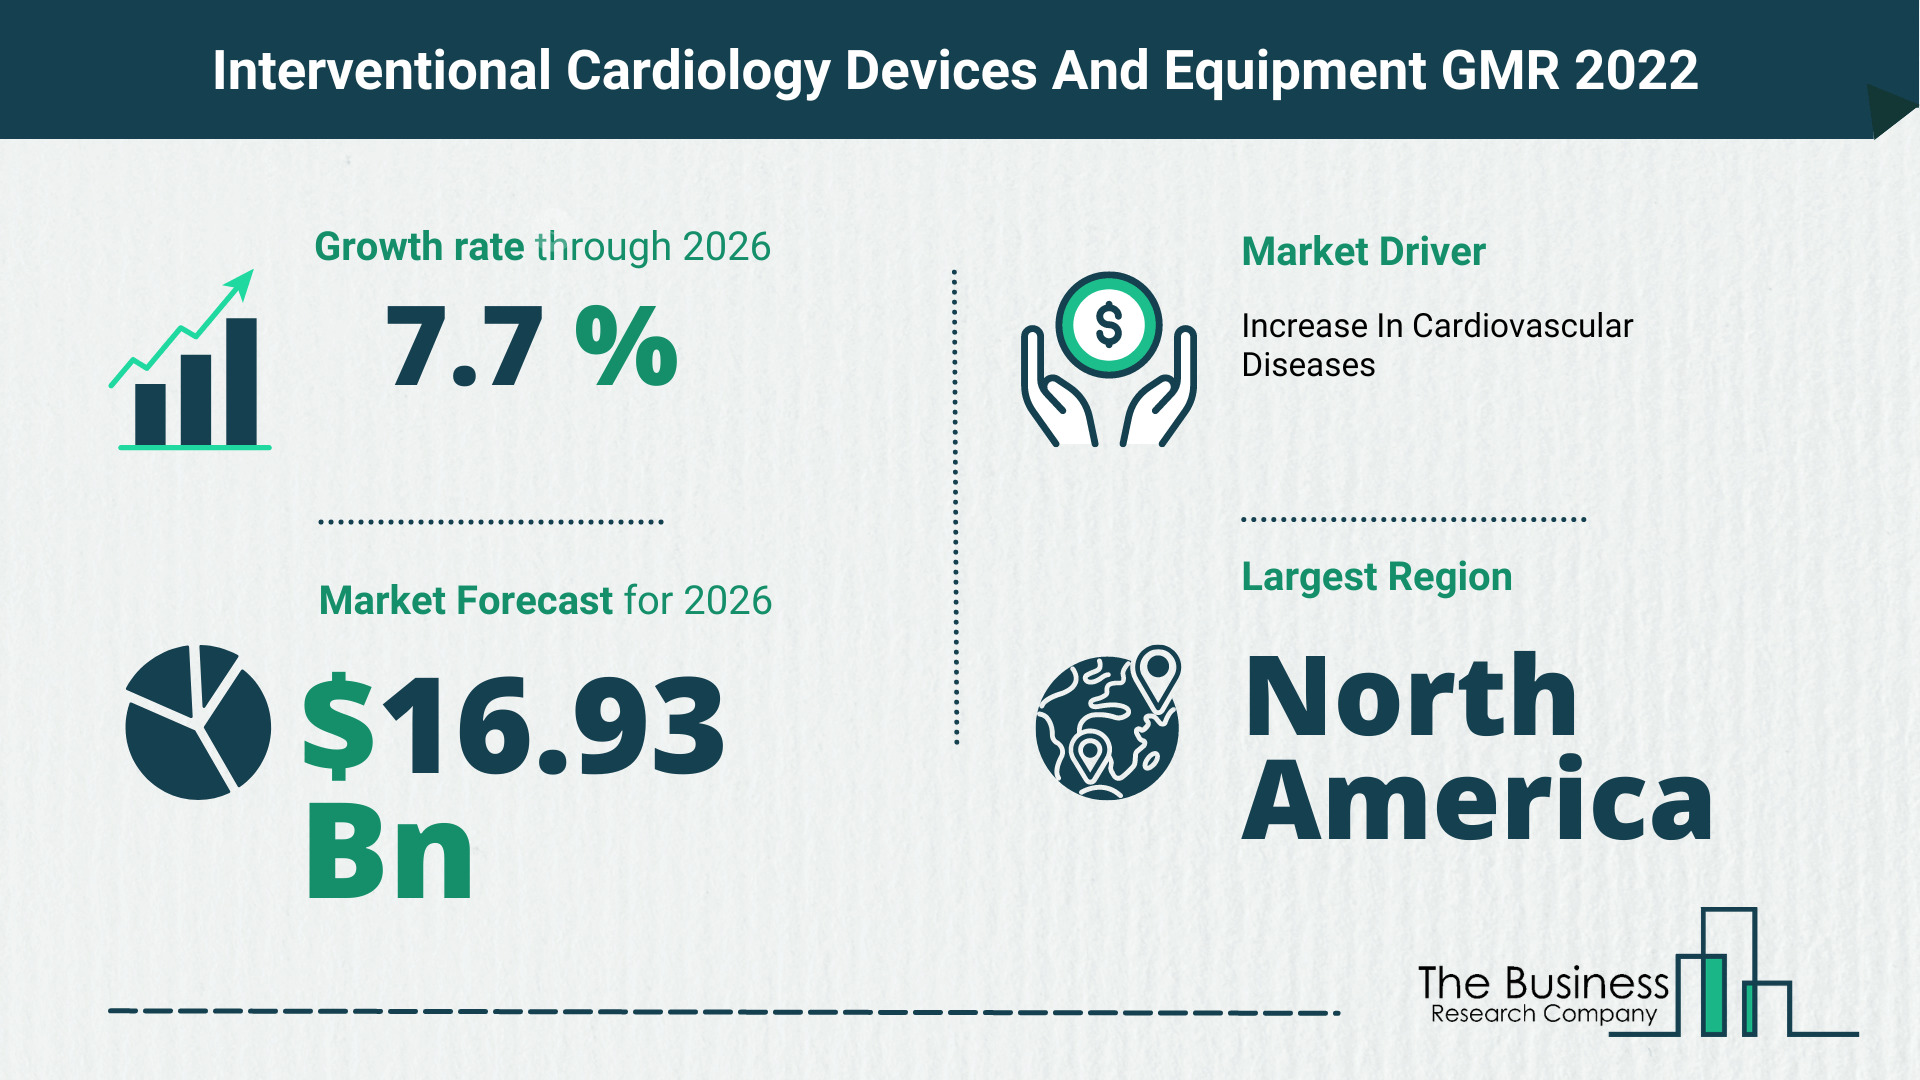 Global Interventional Cardiology Devices And Equipment Market 2022 – Market Opportunities And Strategies